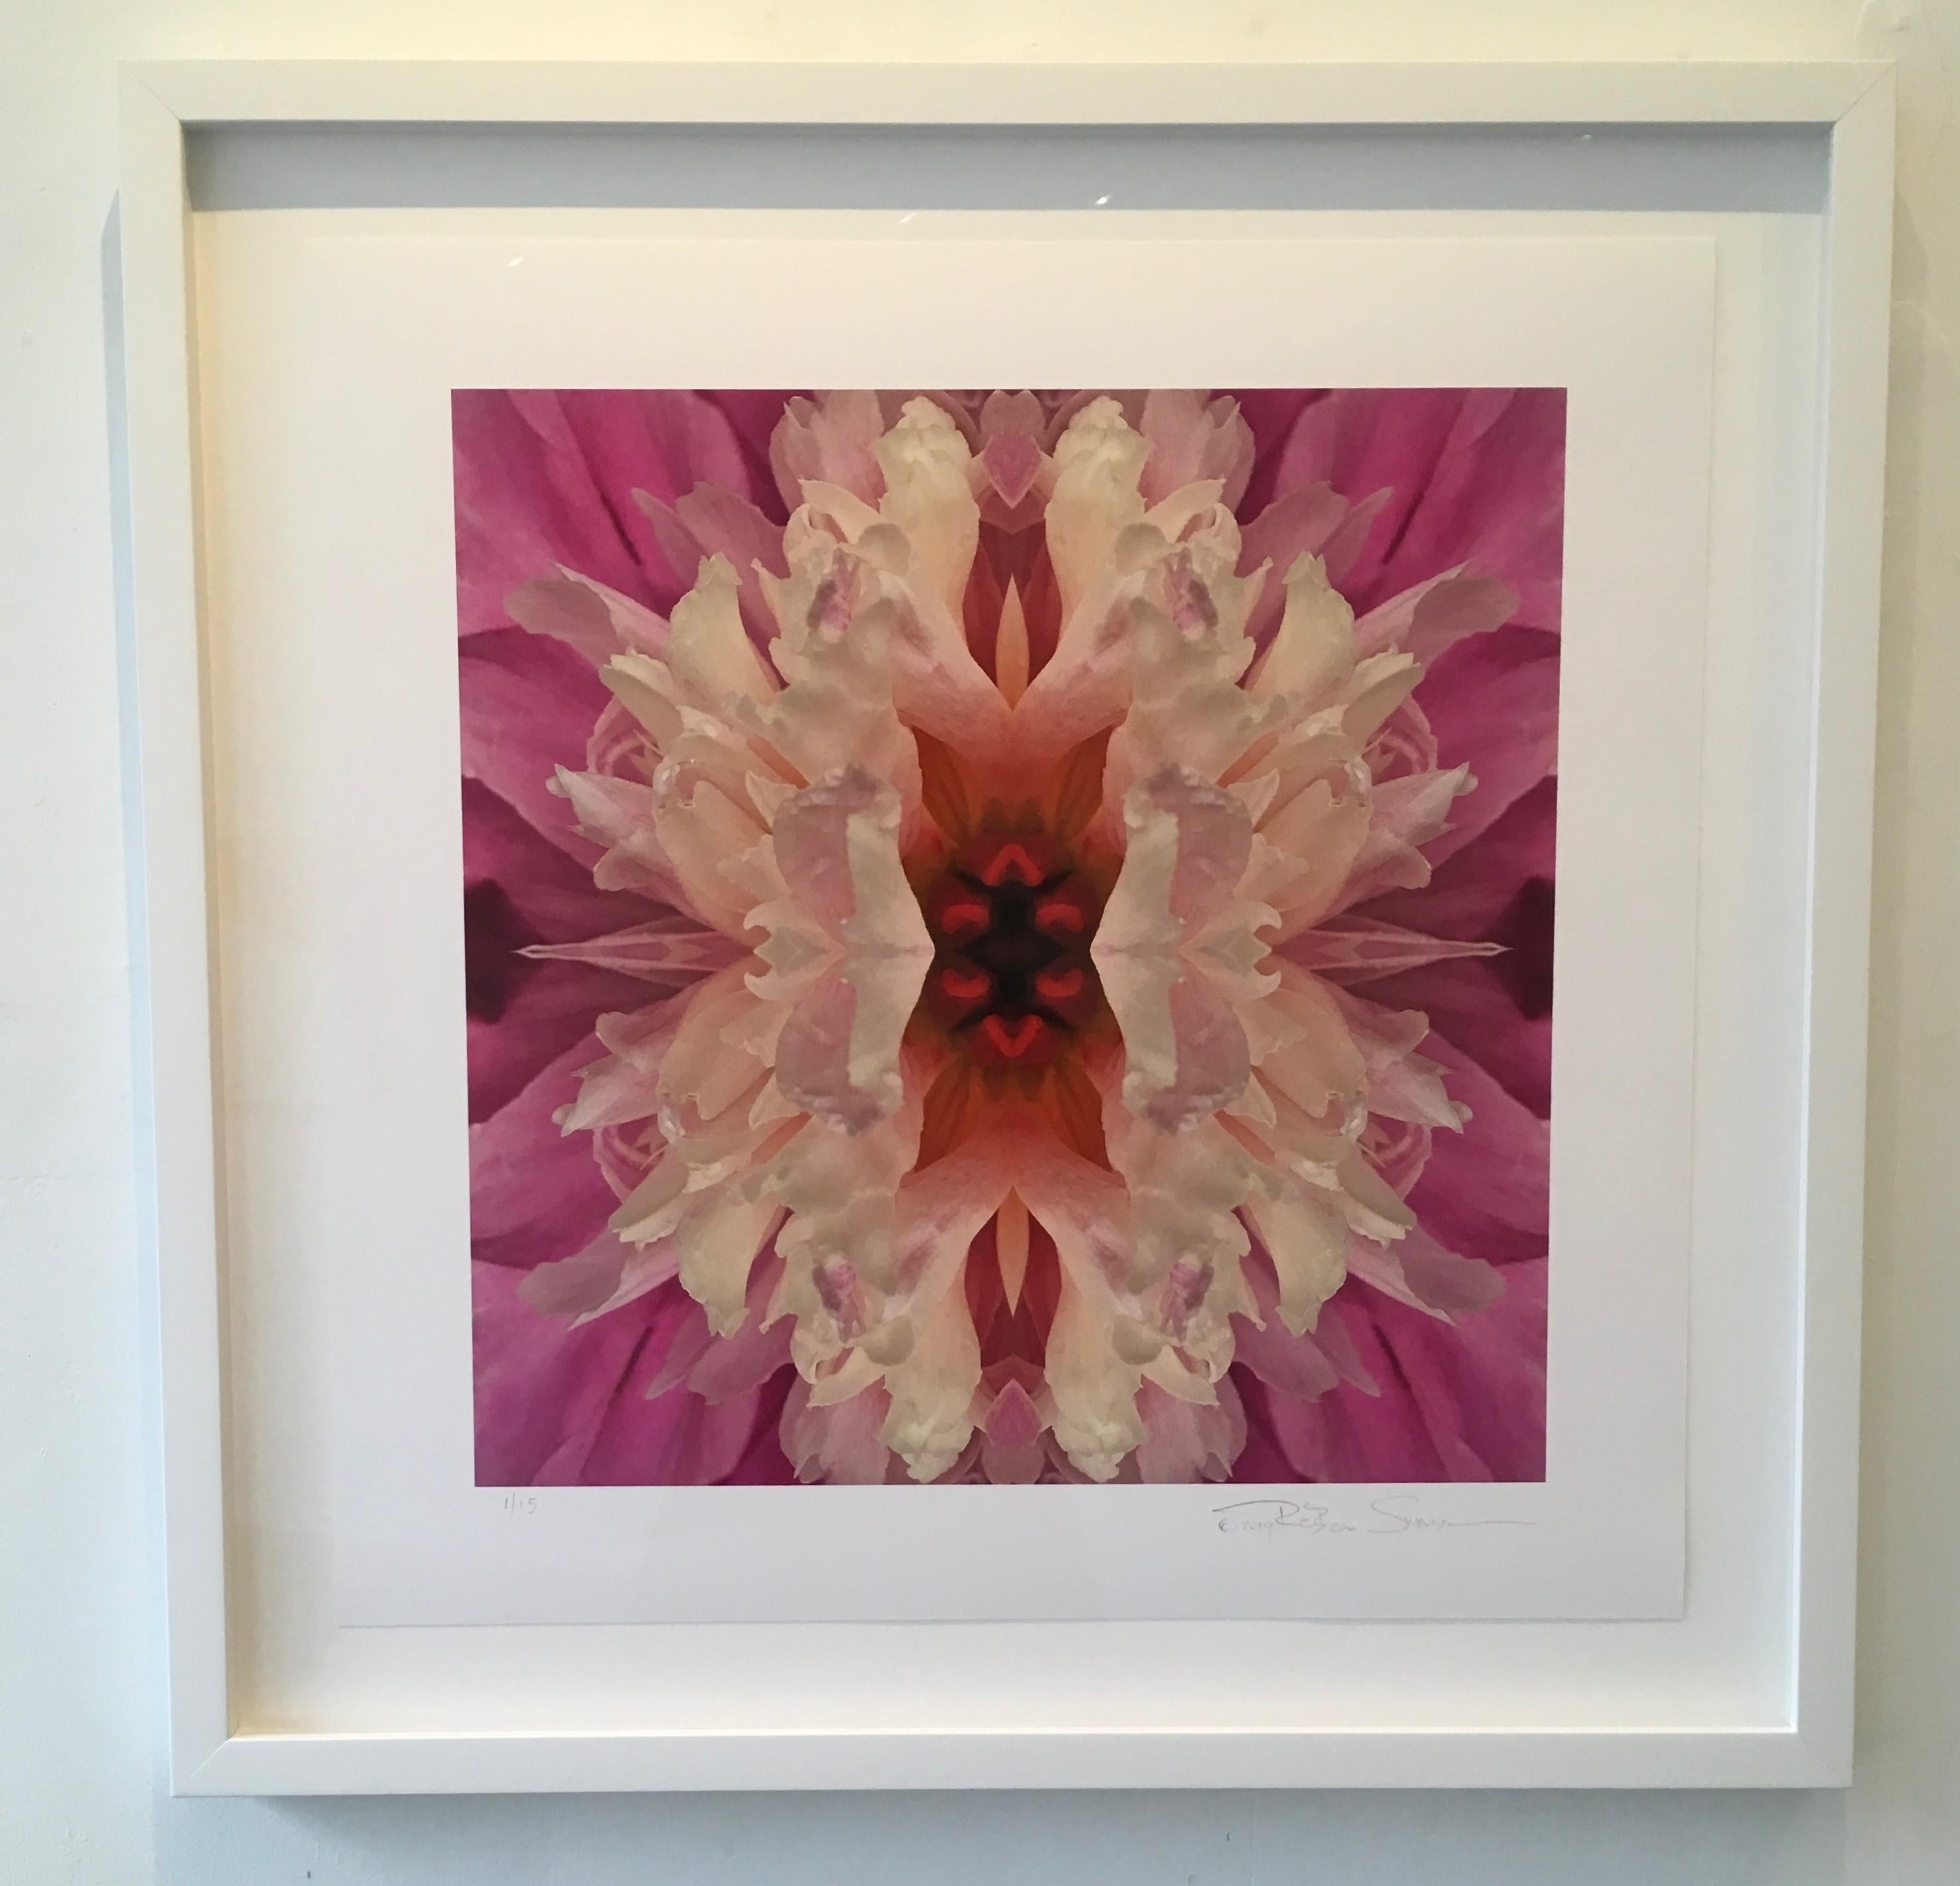 Rebecca Swanson, Flower Child III, Limited Edition Photograph, 15x15.  It is available with Plexifacemount or white frame as shown.  This stunning image is filled purples and red and white.  This is an edition of 15.  Also available in 30x30. 